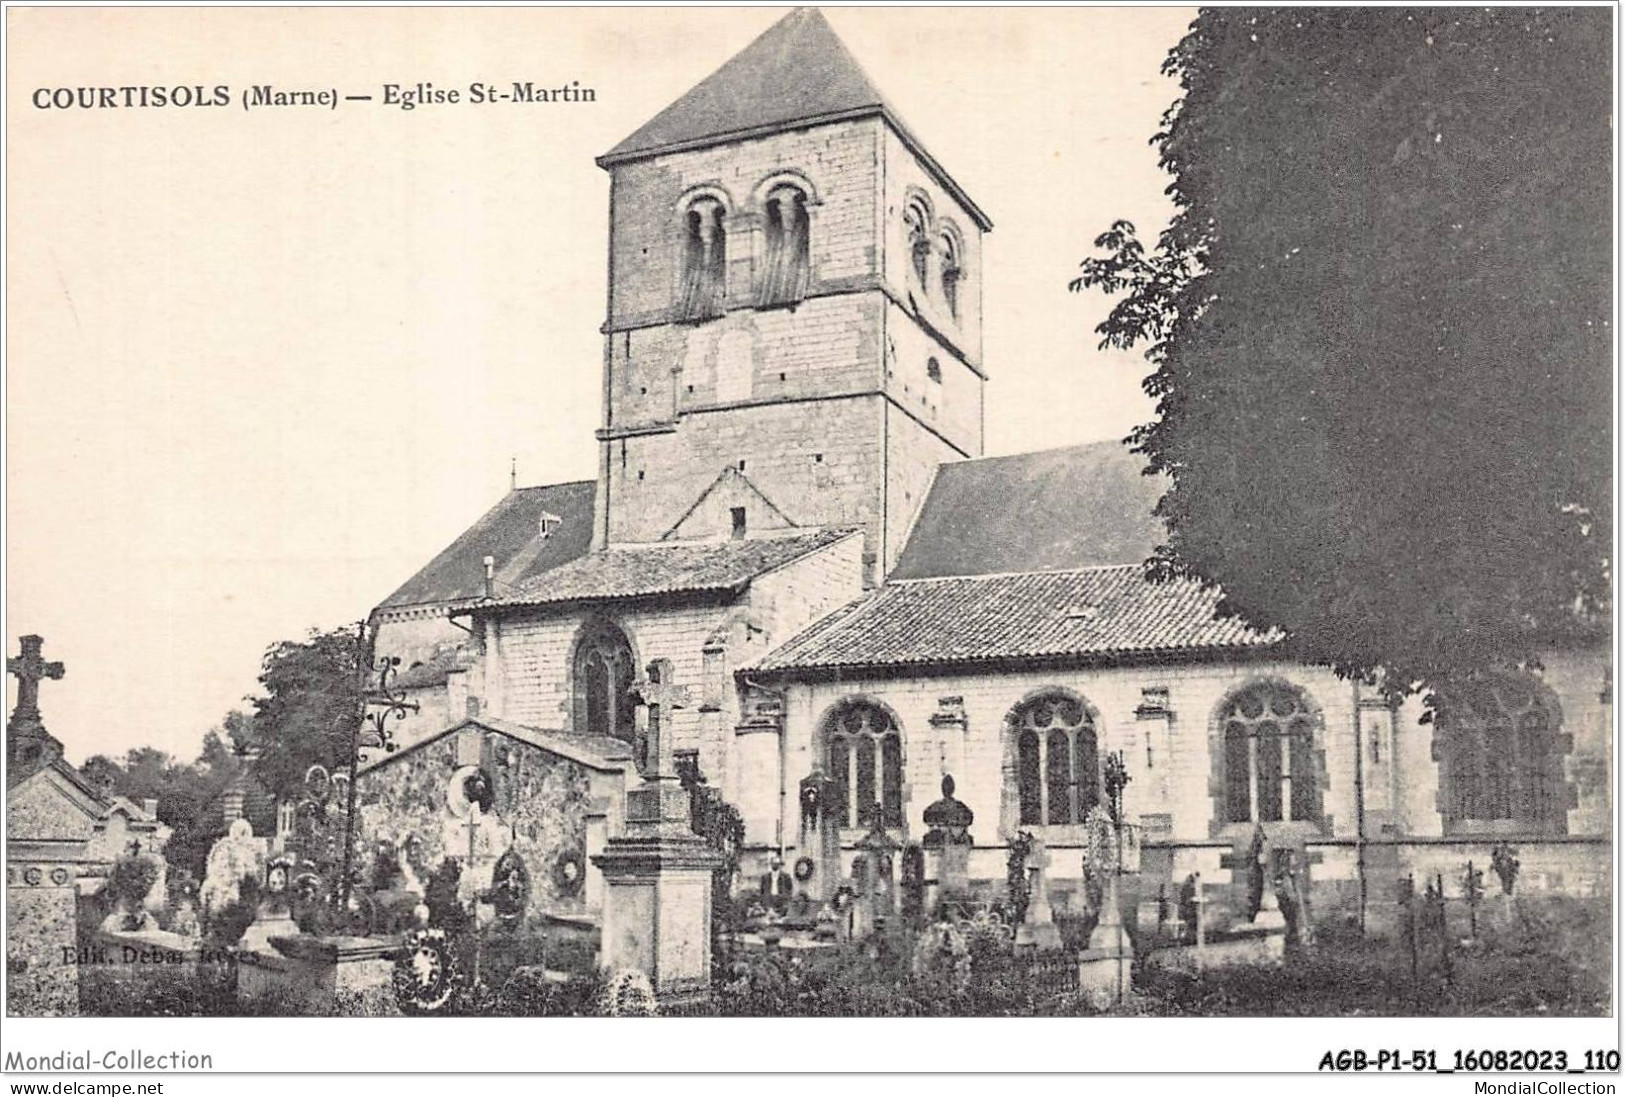 AGBP1-51-0056 - COURTISOLS -eglise St-Martin - Courtisols